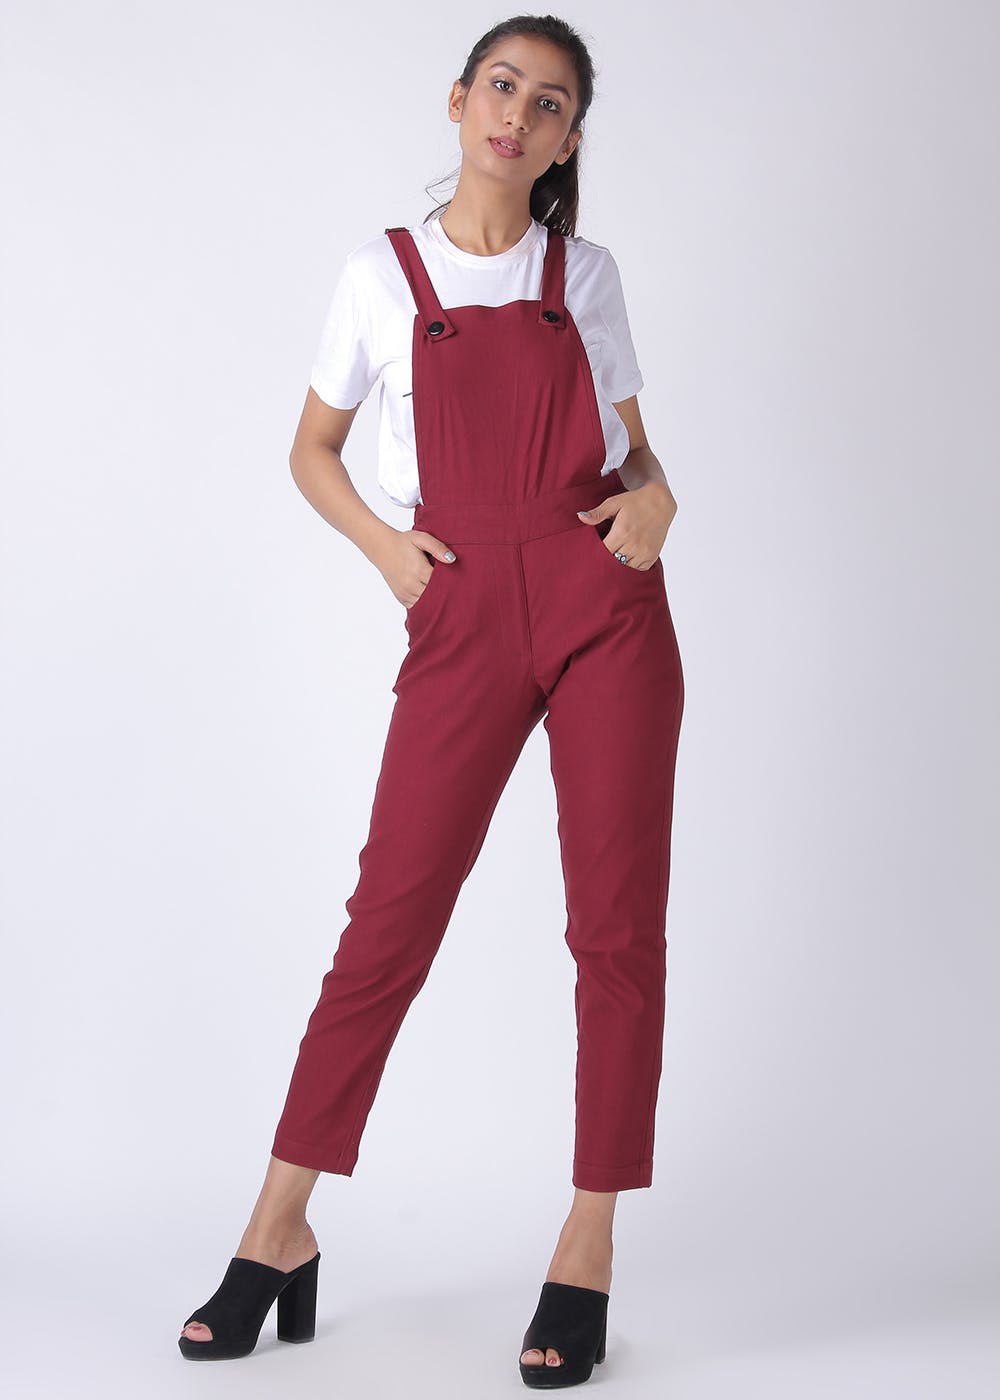 Get Basic Solid Stretchable Dungaree at ₹ 1799 | LBB Shop